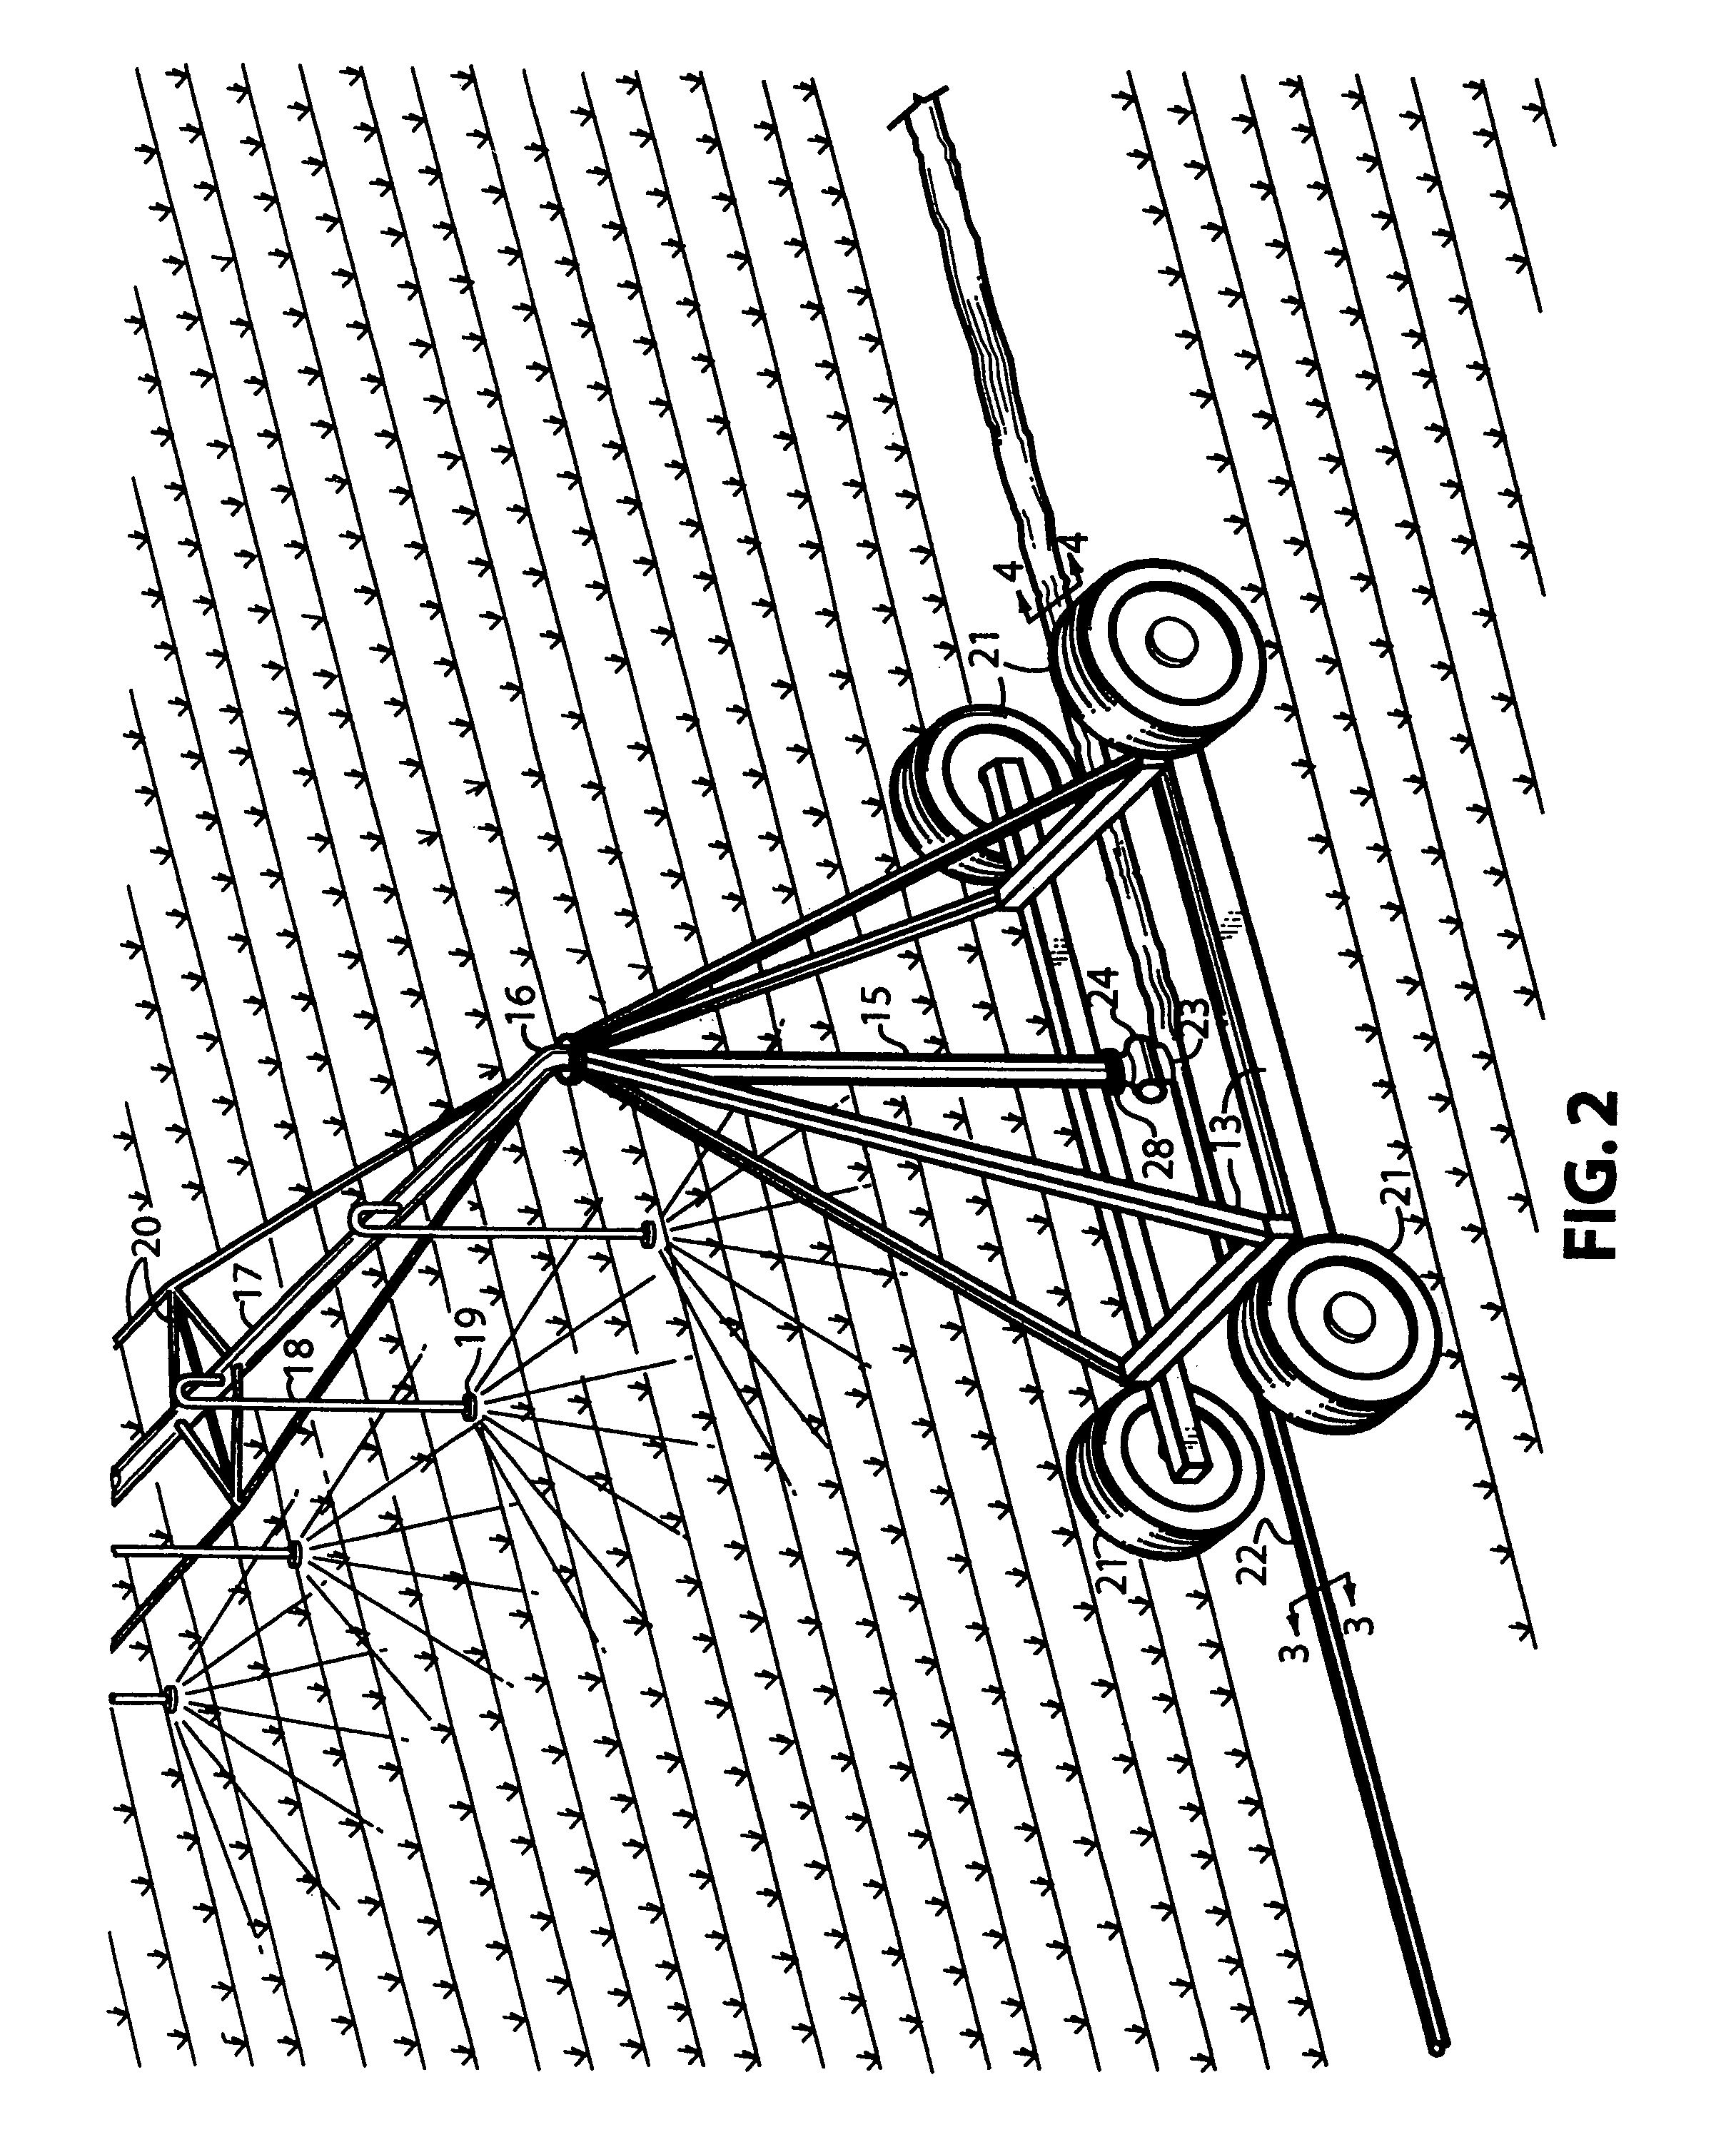 Water supply system for a linearly moving sprinkler irrigation system